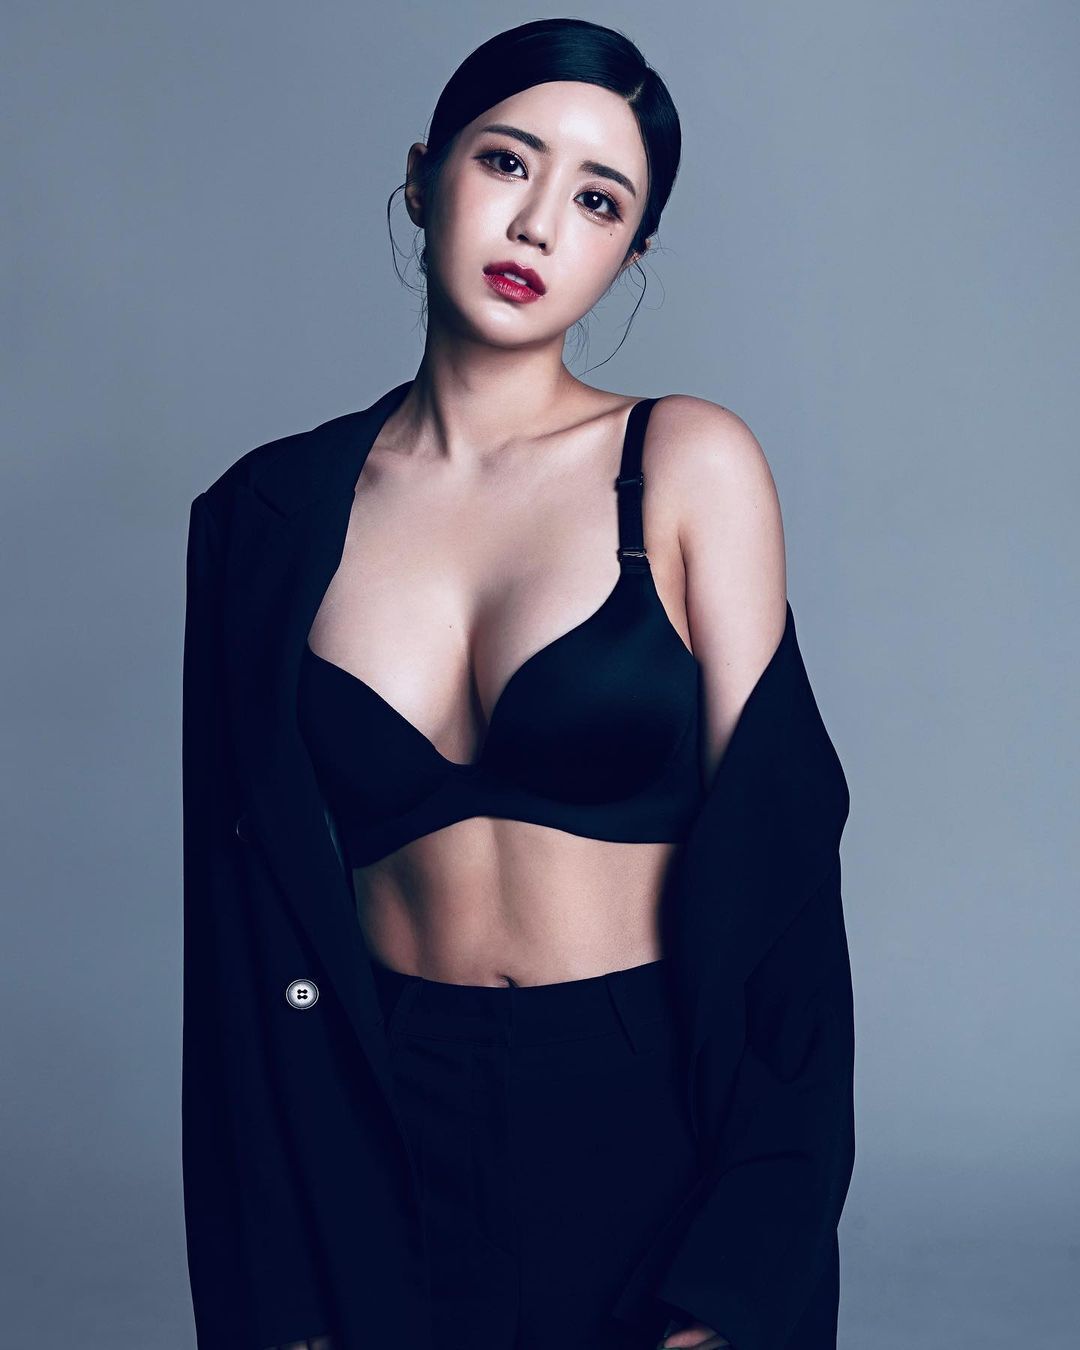 African BJ Seoyoon photo shoot black lace bra cleavage in formal suit